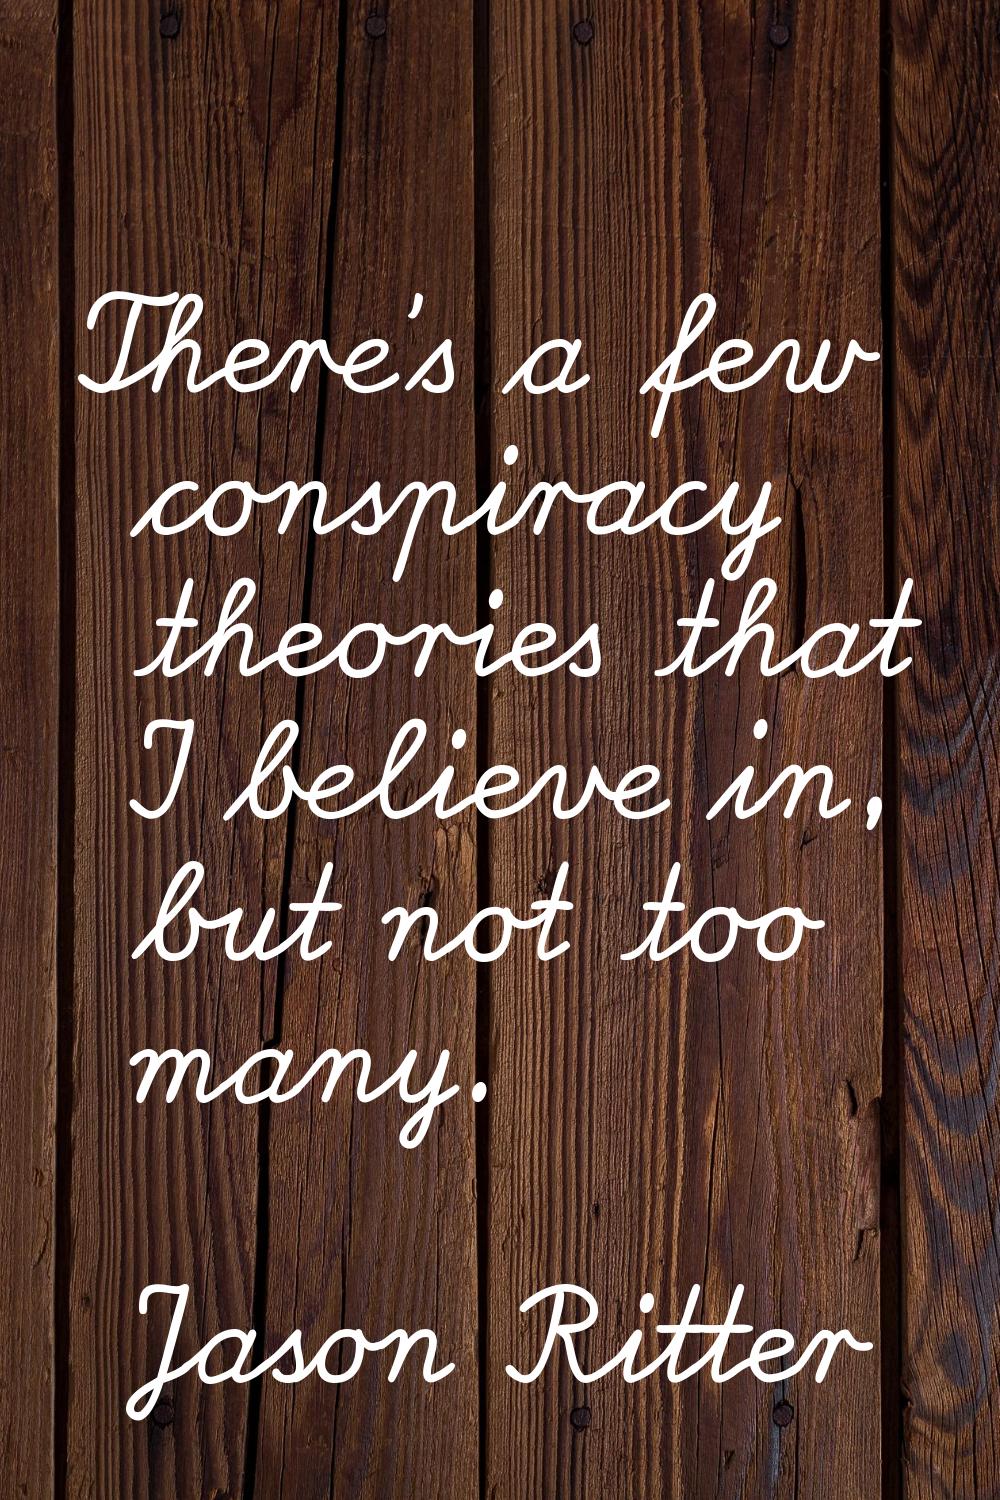 There's a few conspiracy theories that I believe in, but not too many.